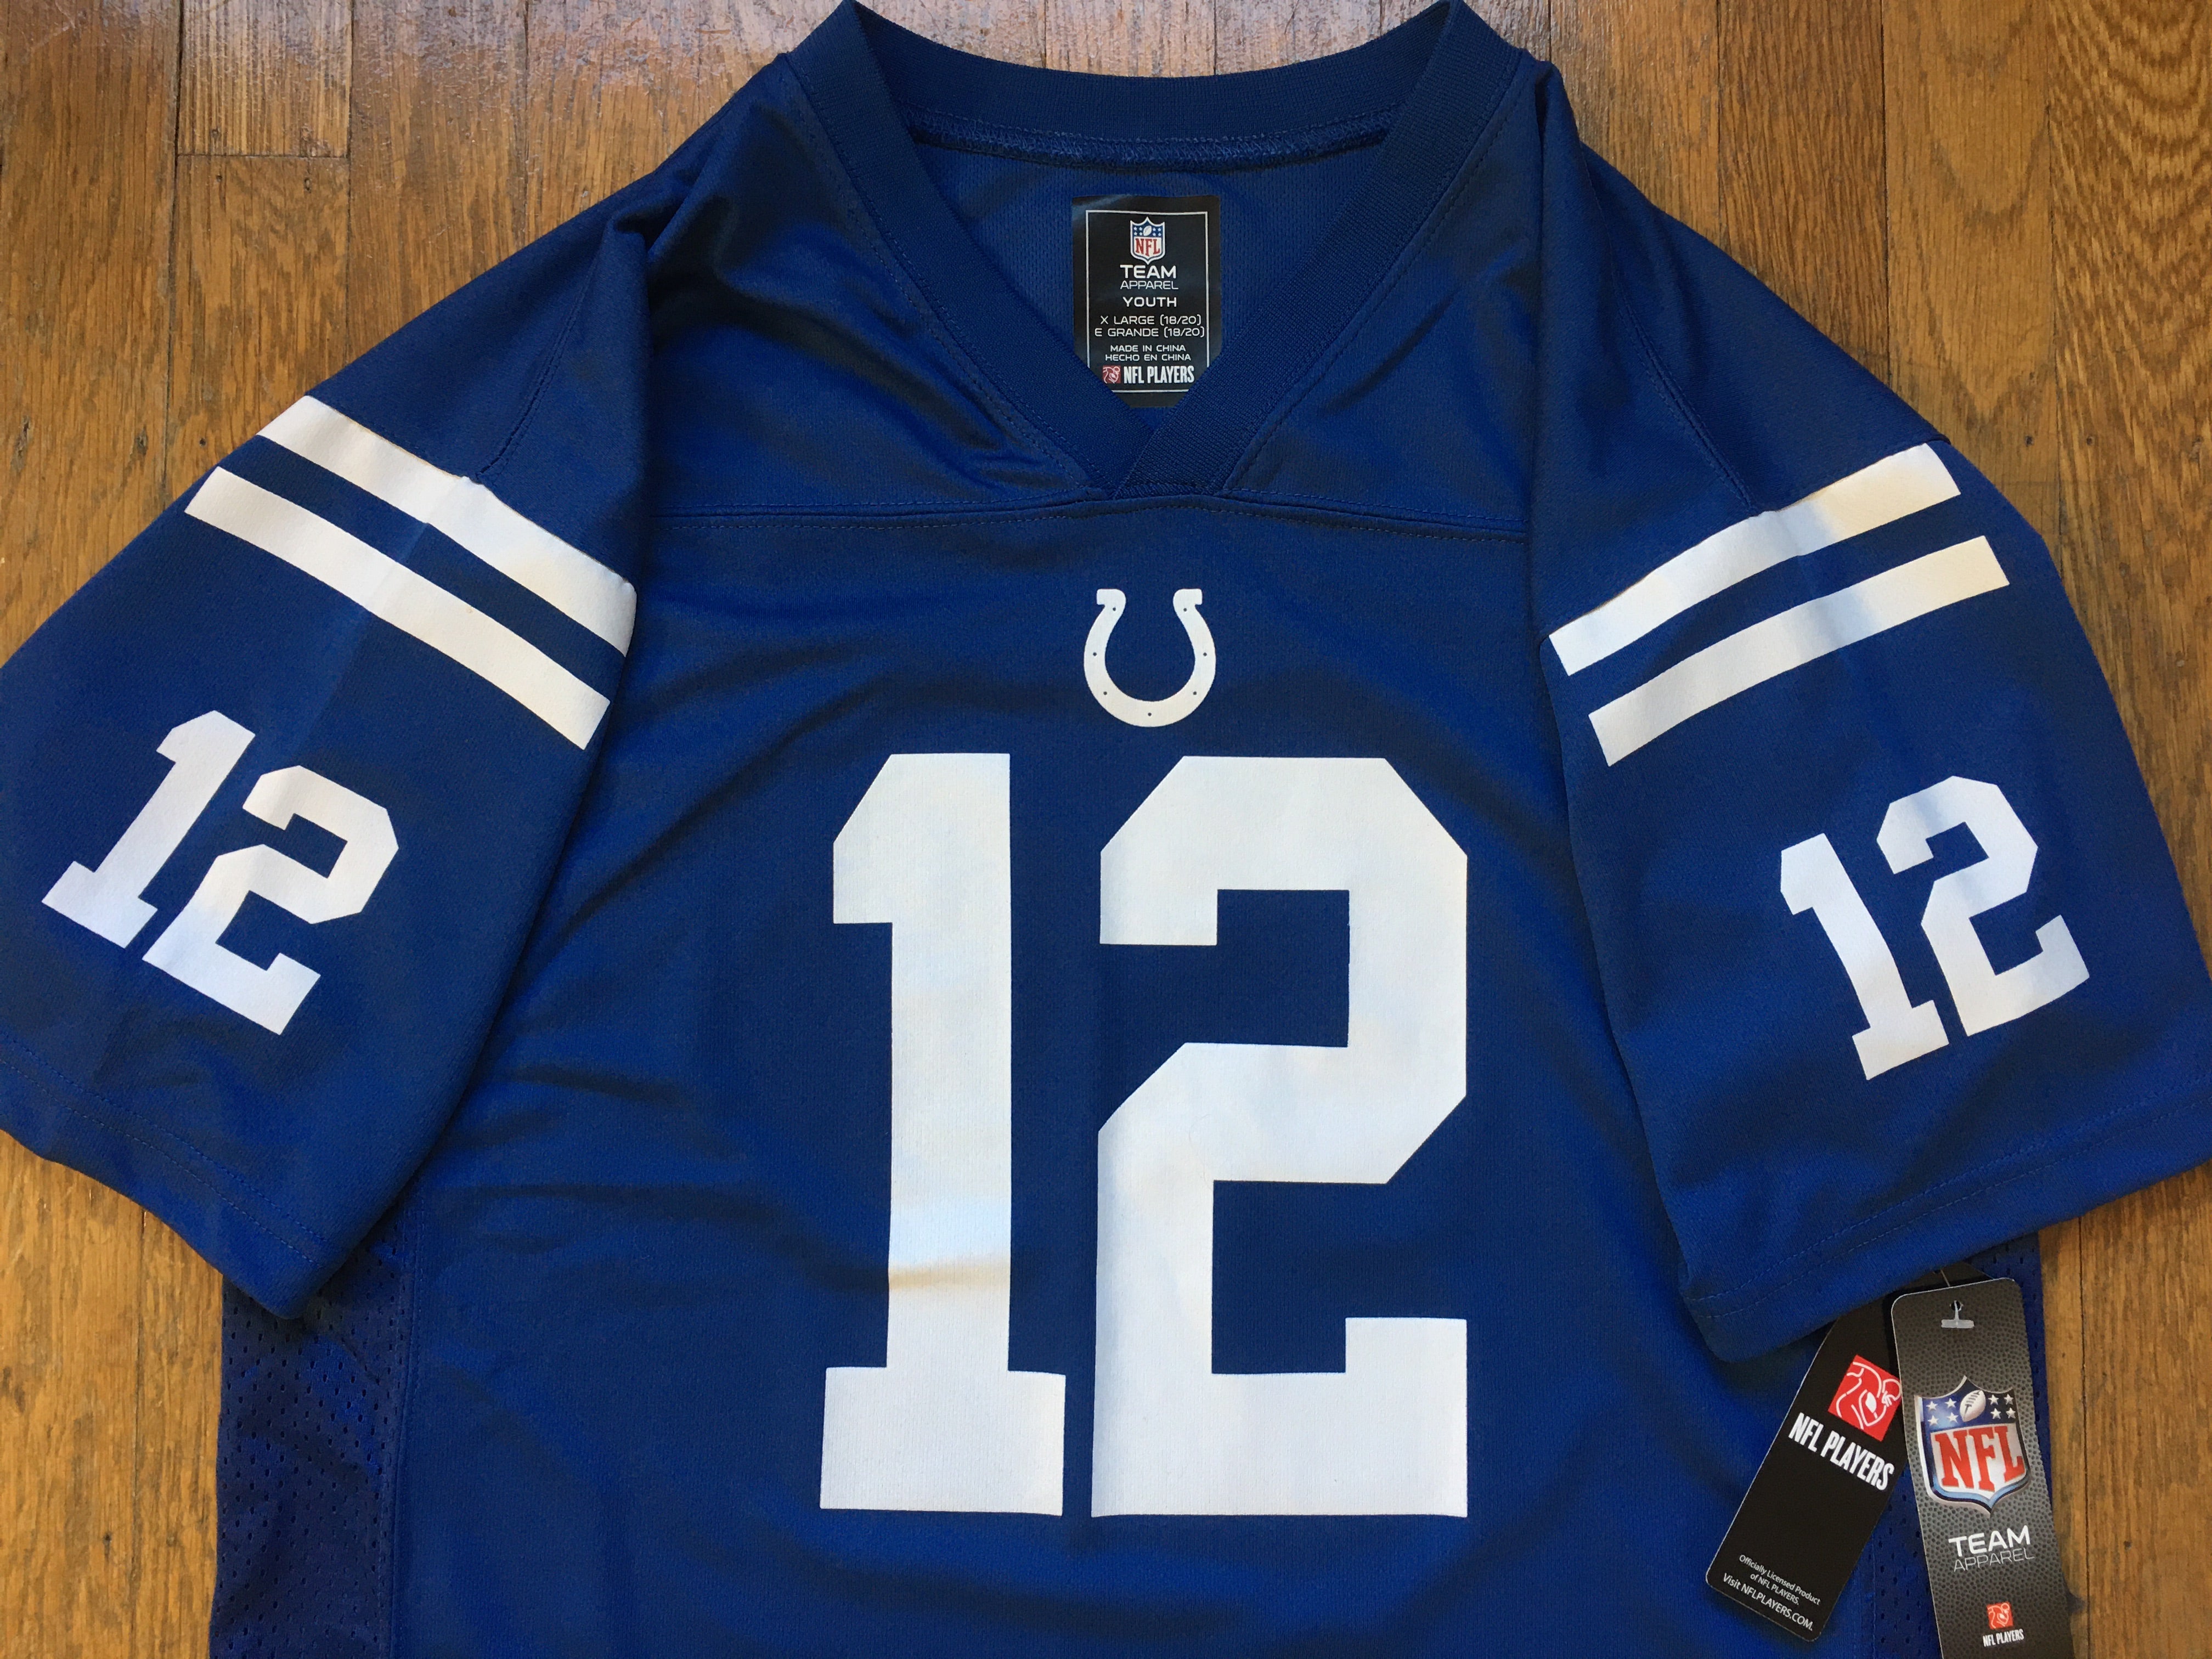 Indianapolis Colts Andrew Luck jersey - Youth XL / adult S or M -  VintageSportsGear